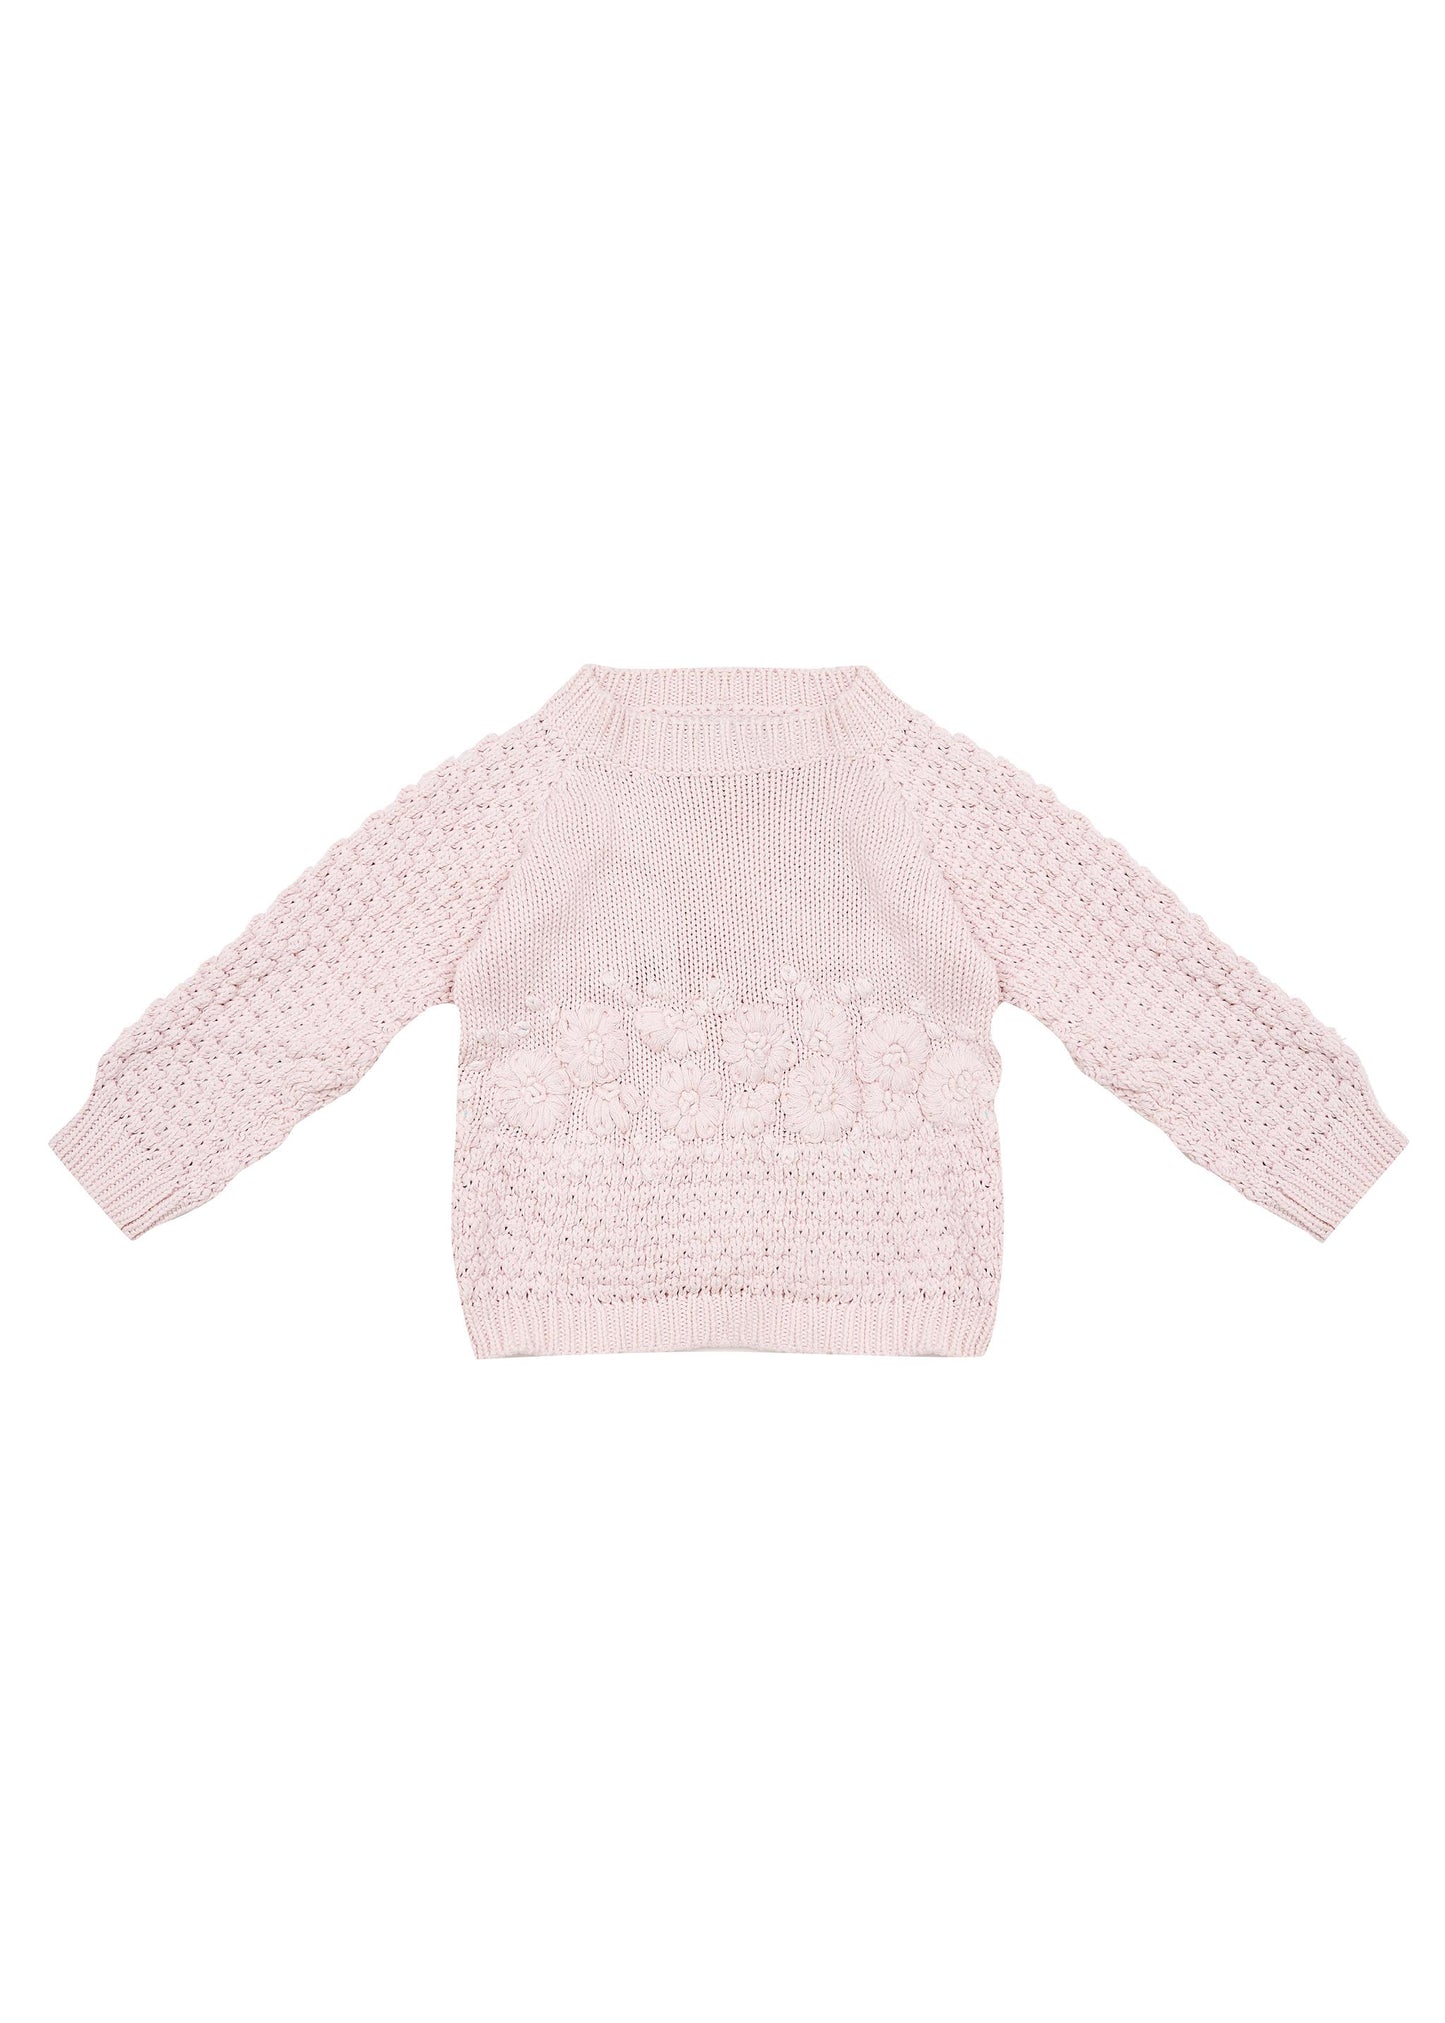 Marigold Knitted Jumper - Coconut Ice